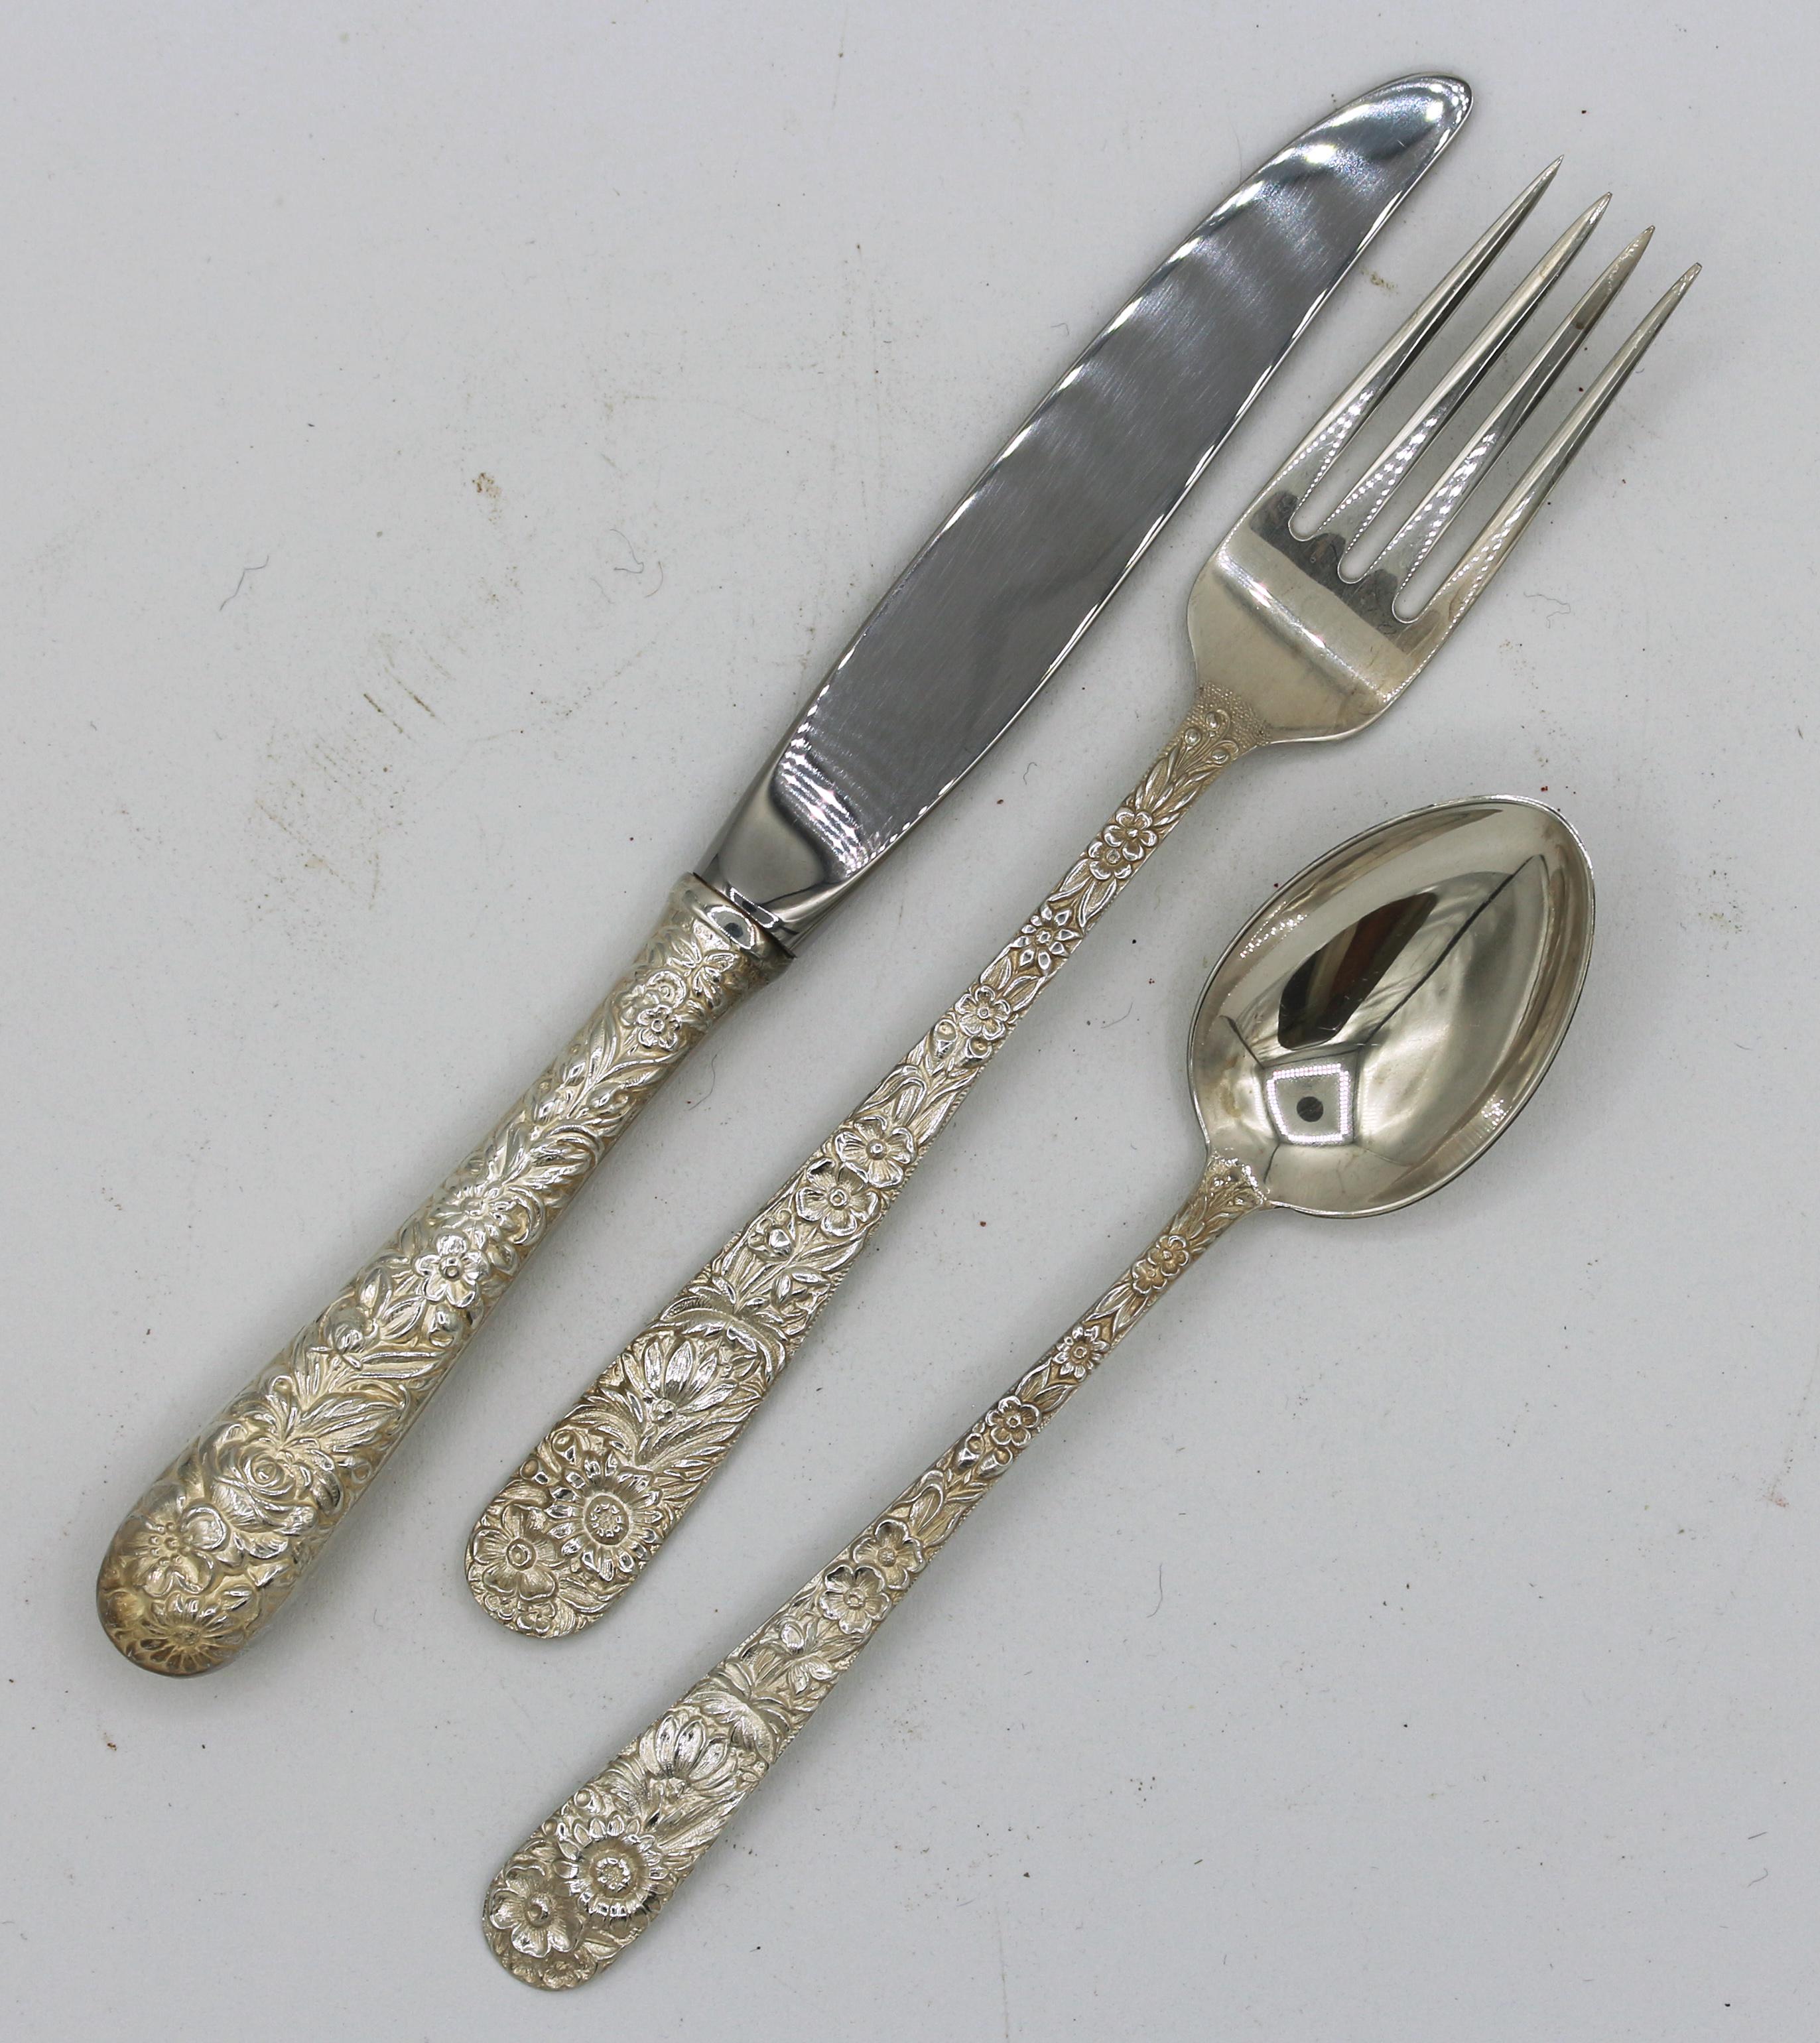 A complete Kirk repousse child's dinner service: knife, fork, and spoon (latter two monogramed 